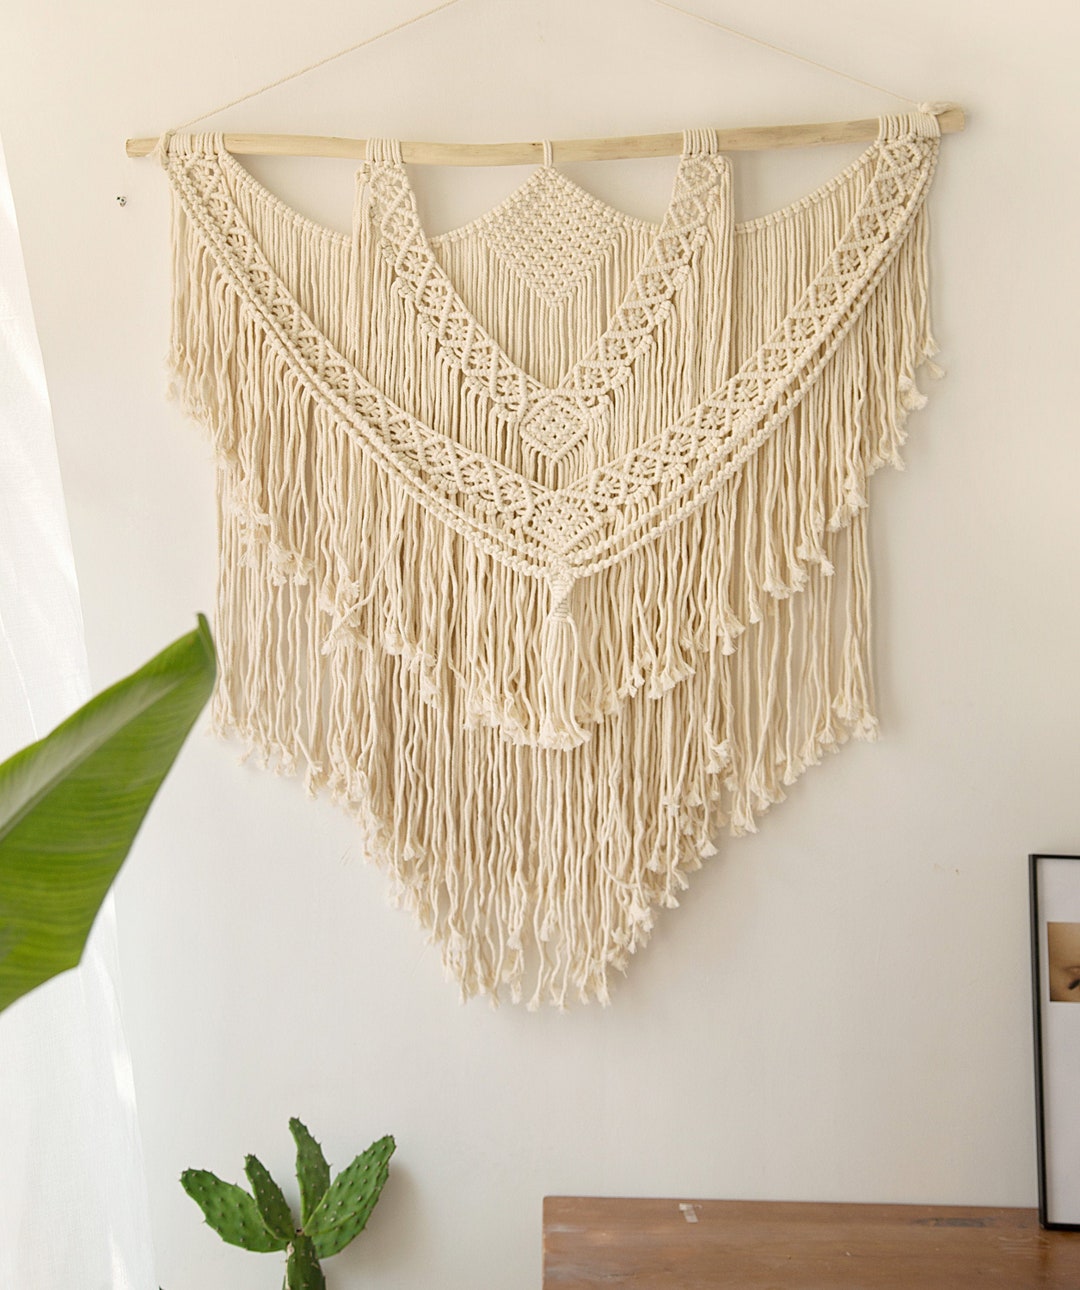 Macrame Wall Hanging, Tapestry Wall Hanging, Large Macrame Wall Hanging,  Macrame Wedding Backdrop, Macrame on Driftwood, Woven Hangers 